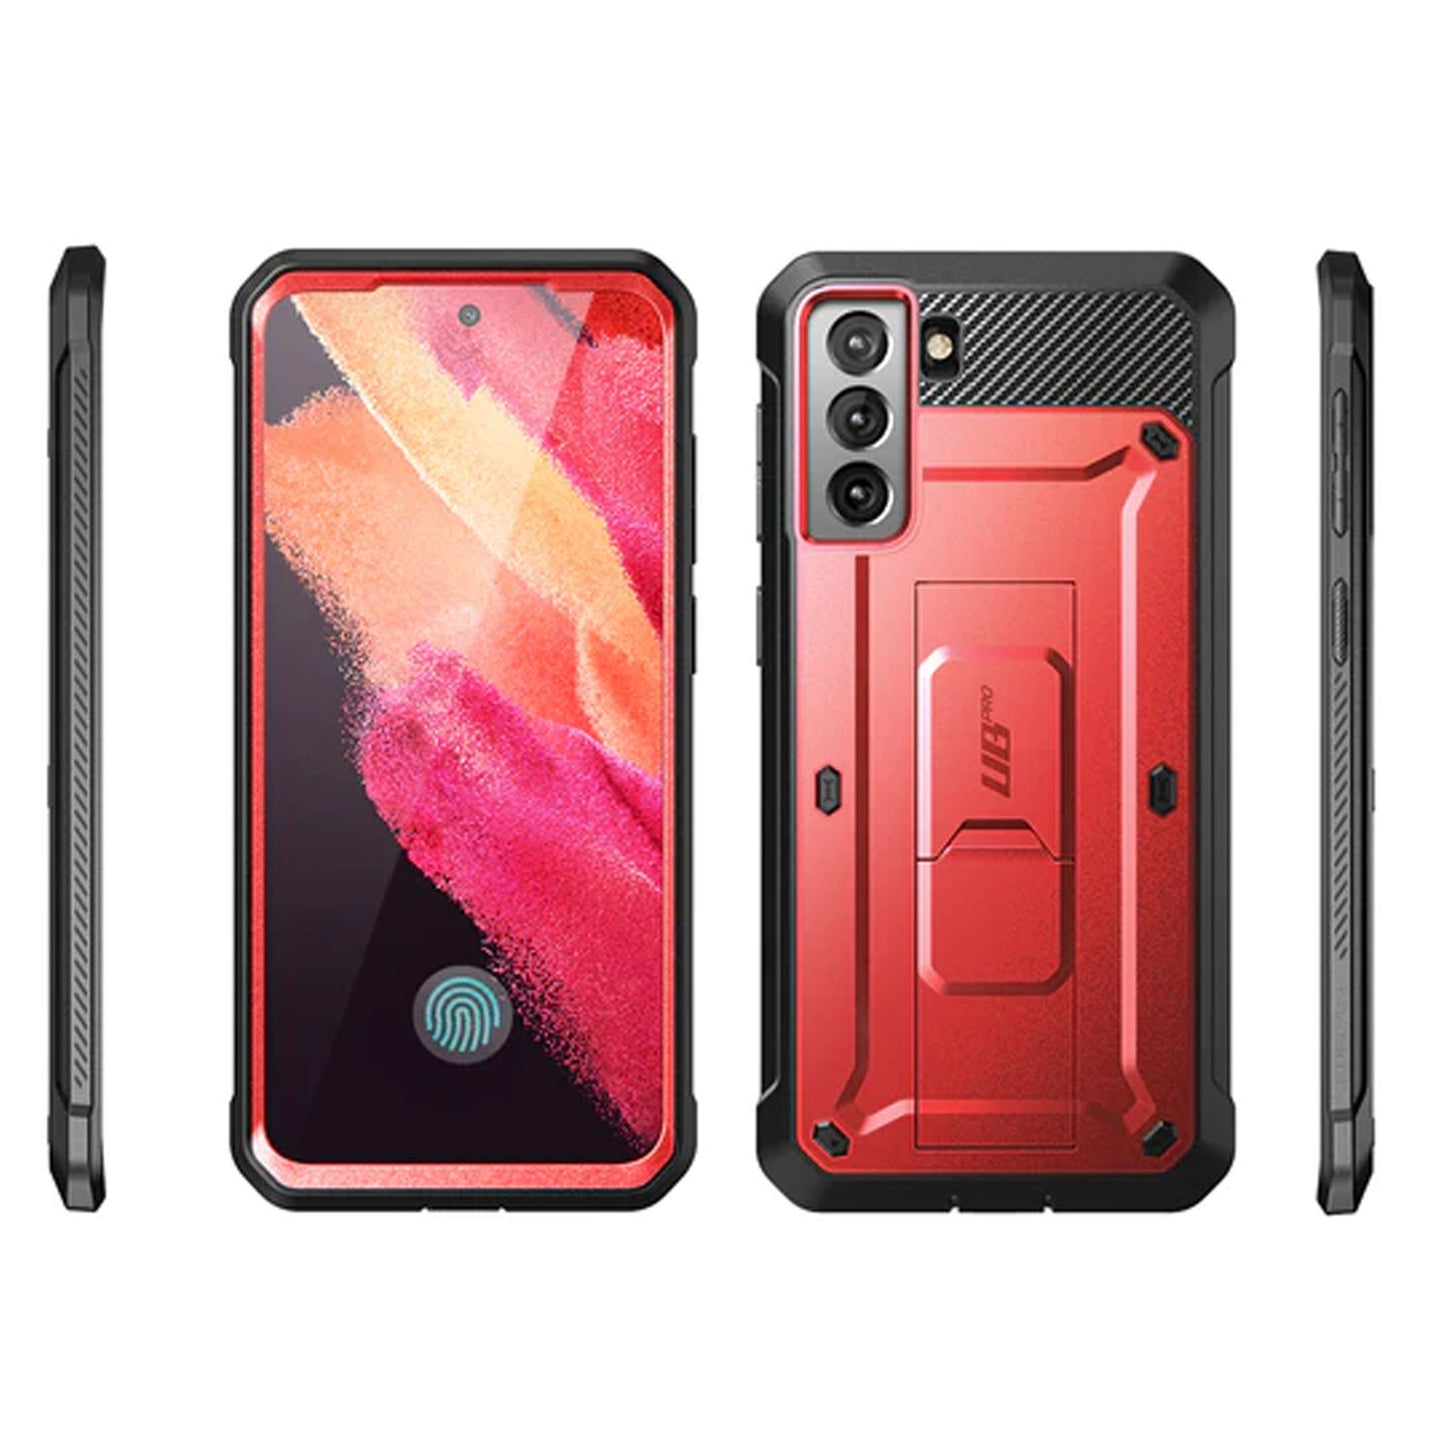 Supcase Unicorn Beetle Pro Rugged Case for Samsung Galaxy S21 FE with Built-in Screen Protector - Metallic Red (Barcode: 843439113381 )